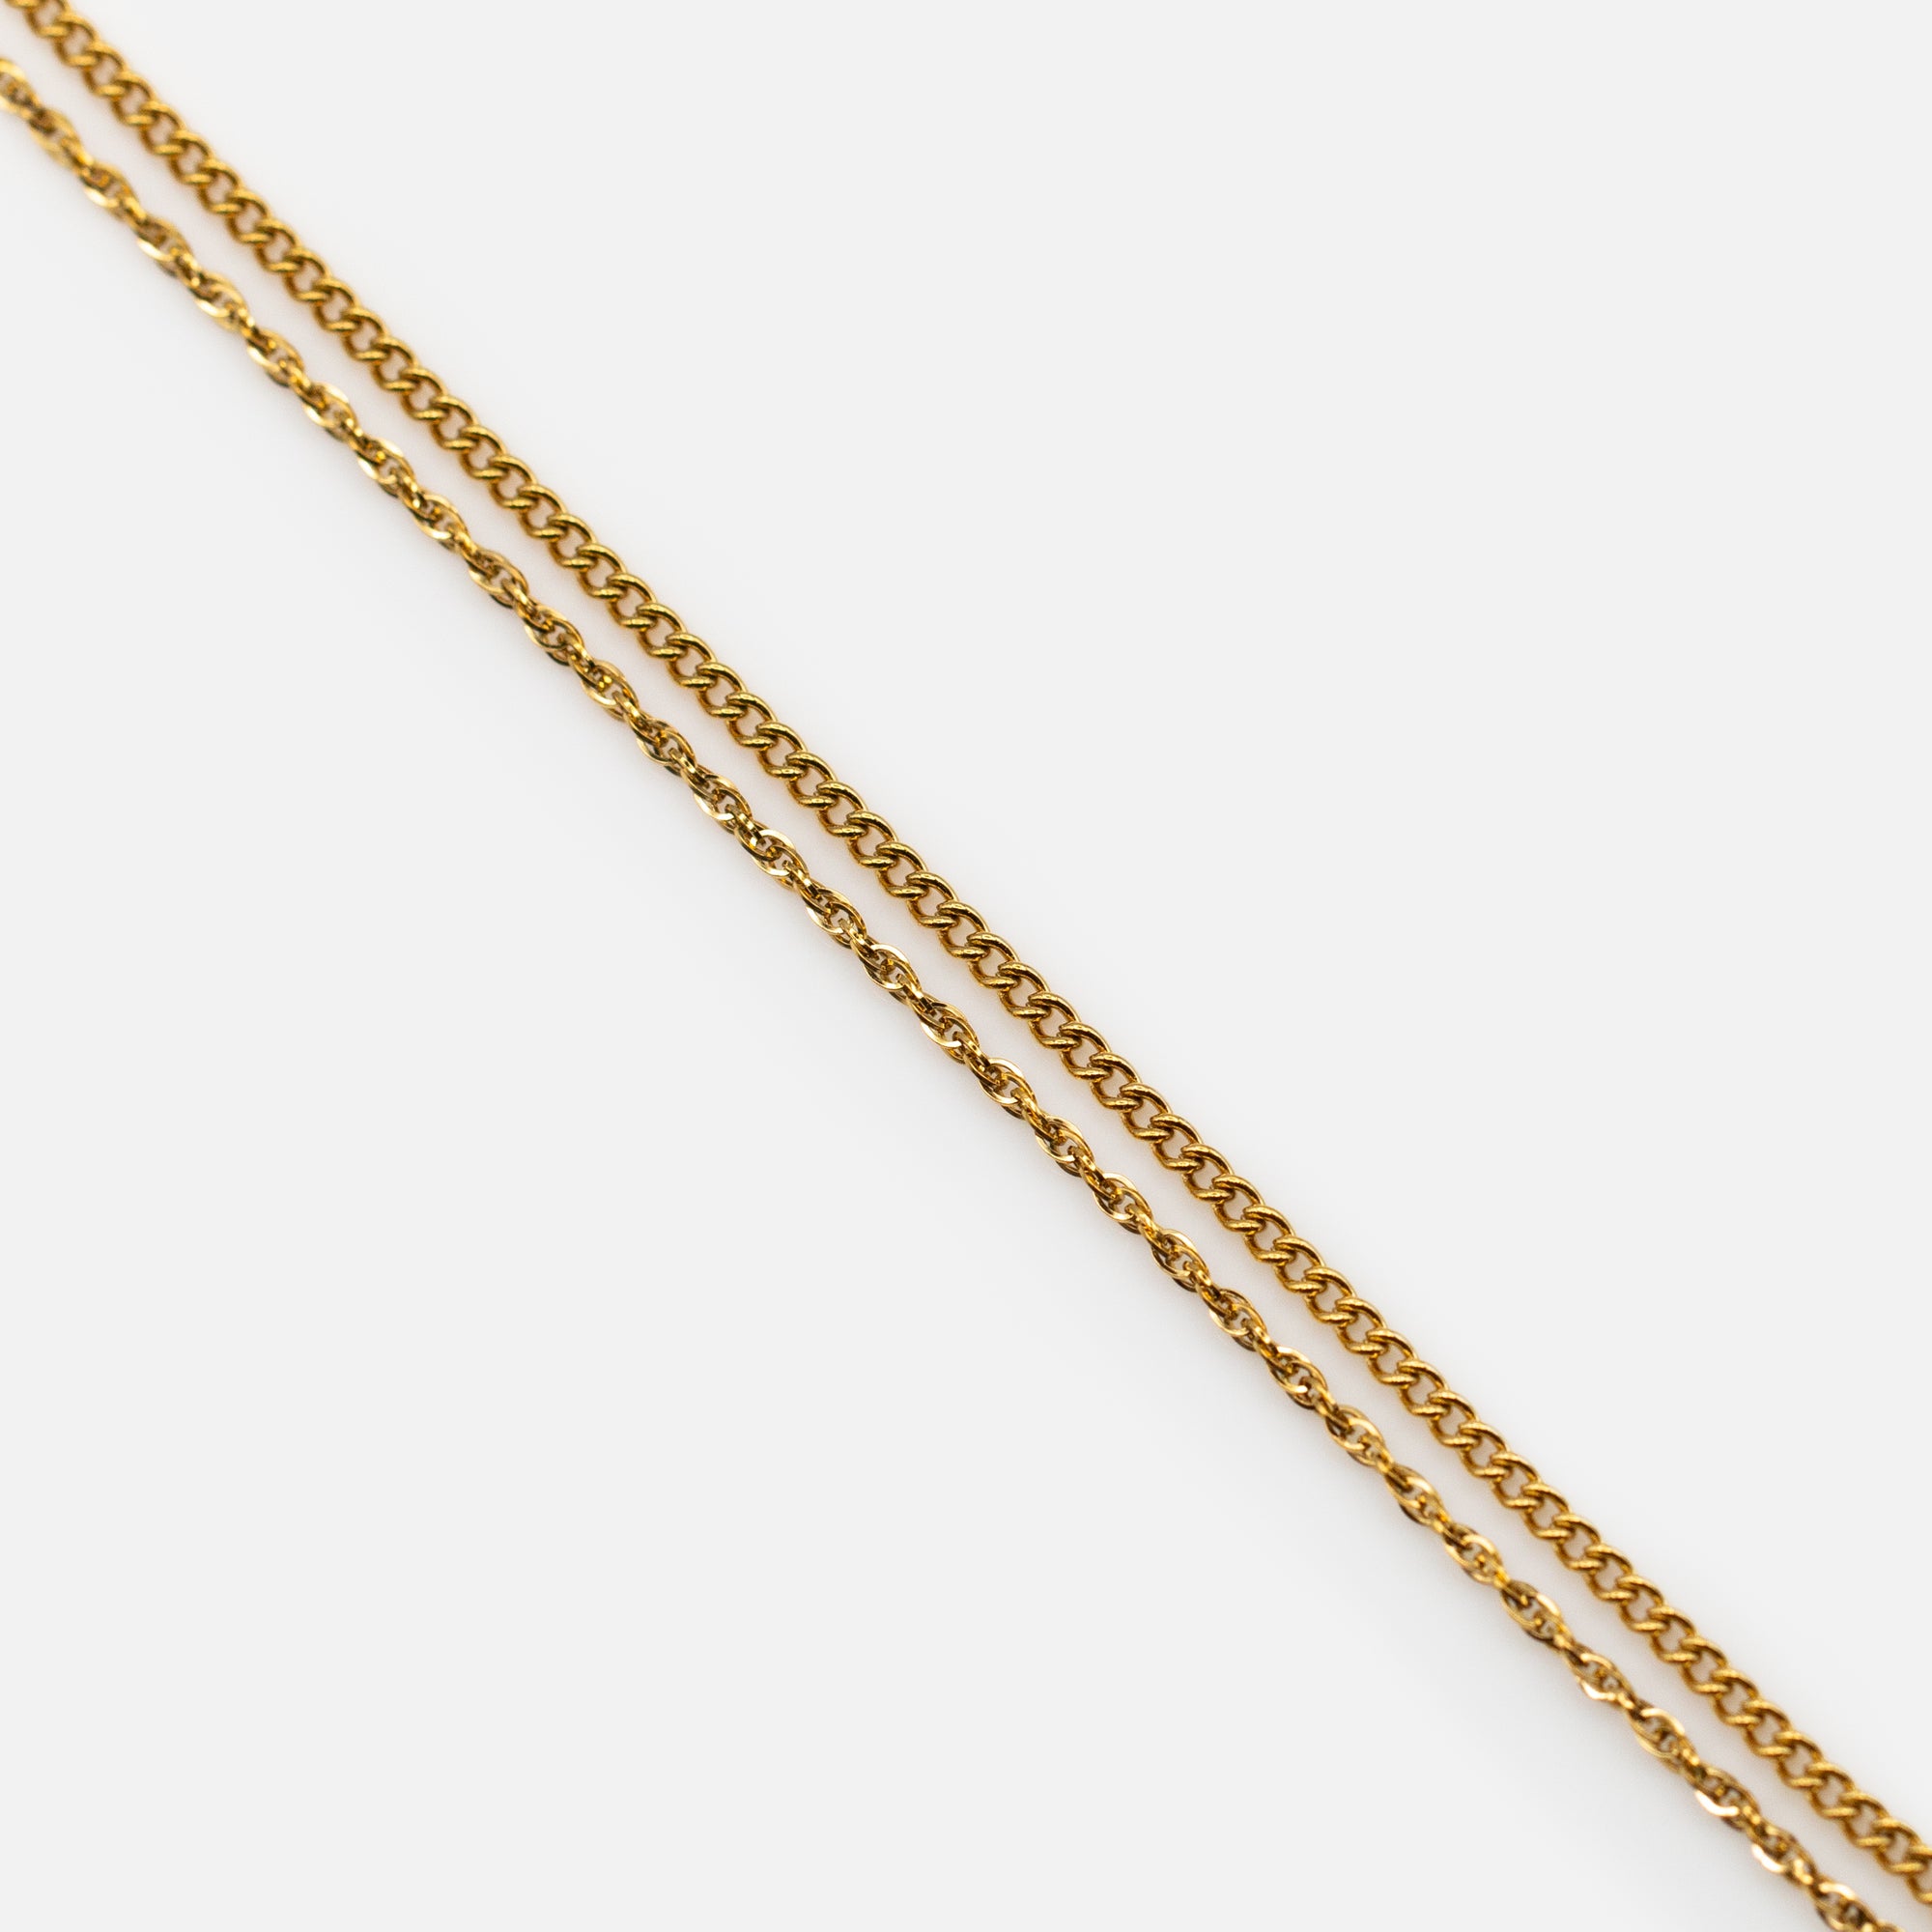 Goldeb double stainless steel anklet